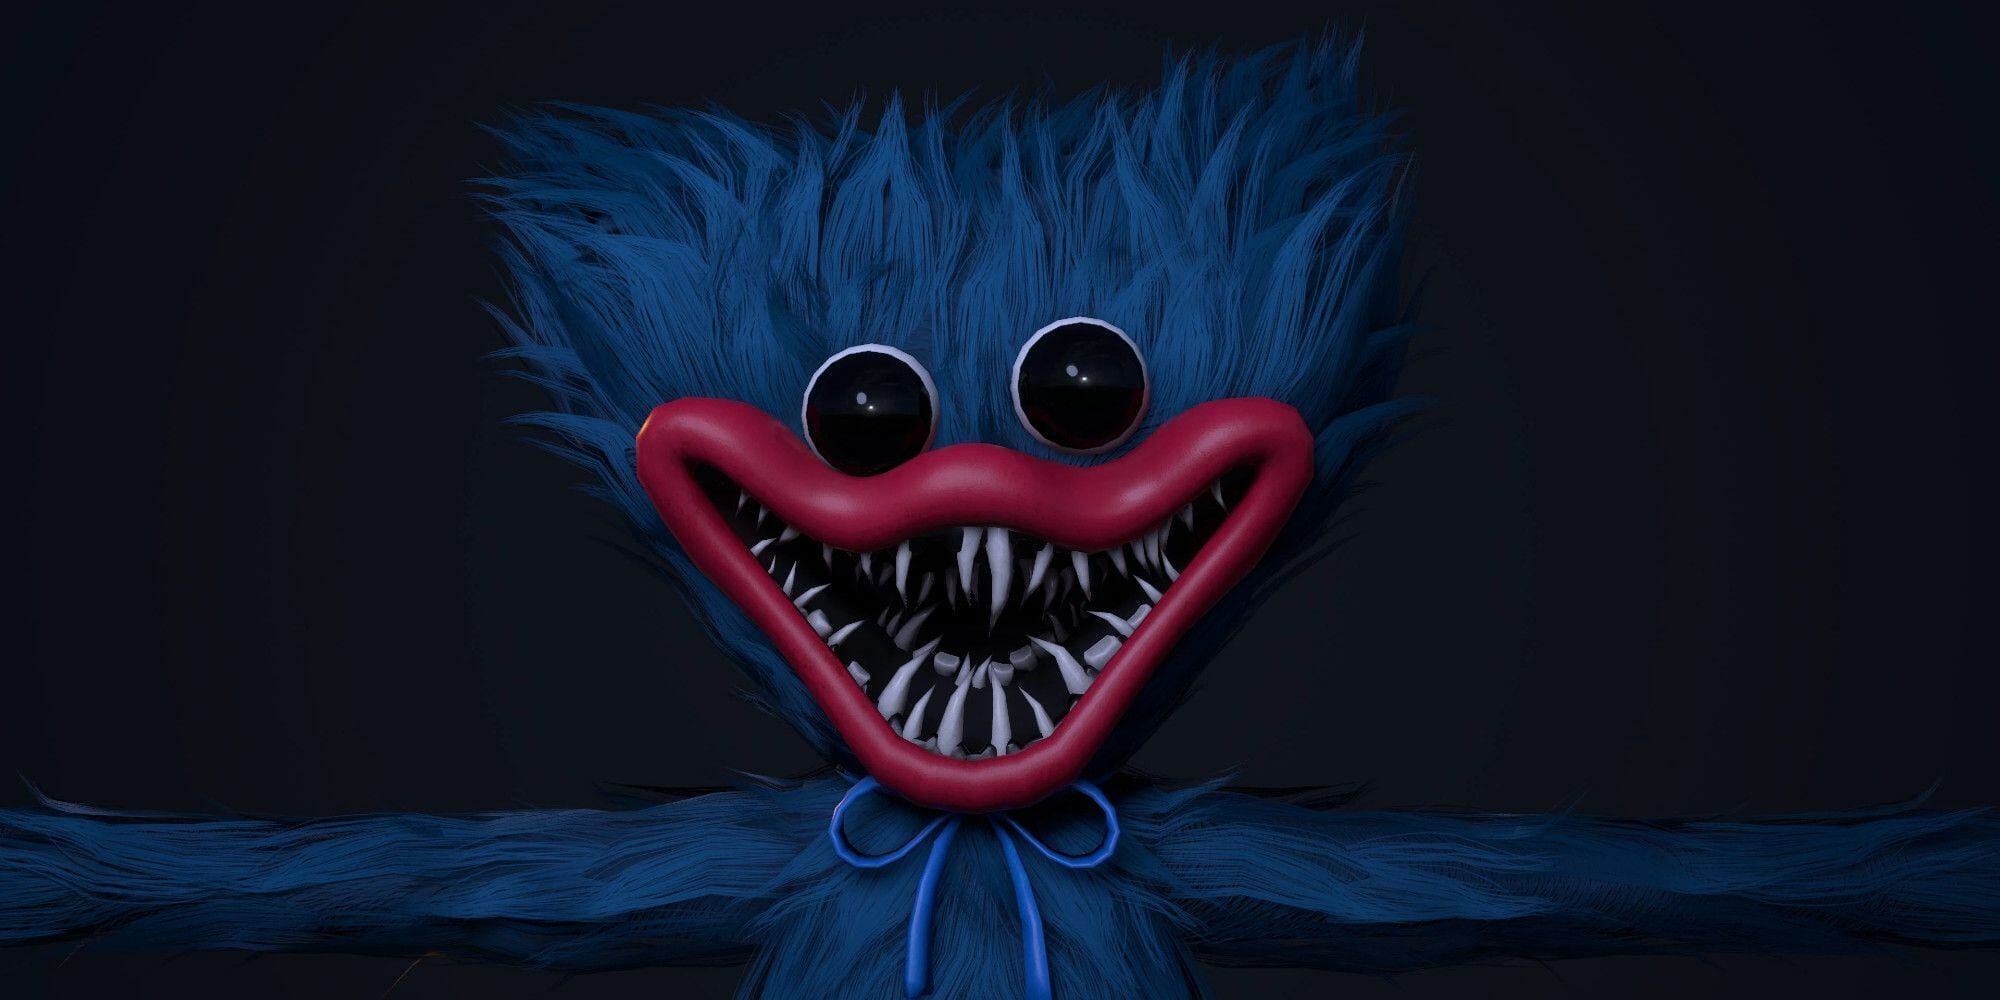 An image of Poppy Playtime's Huggy Wuggy staring at the camera, from the crossover DLC in Monsters and Mortals: Dark Deception